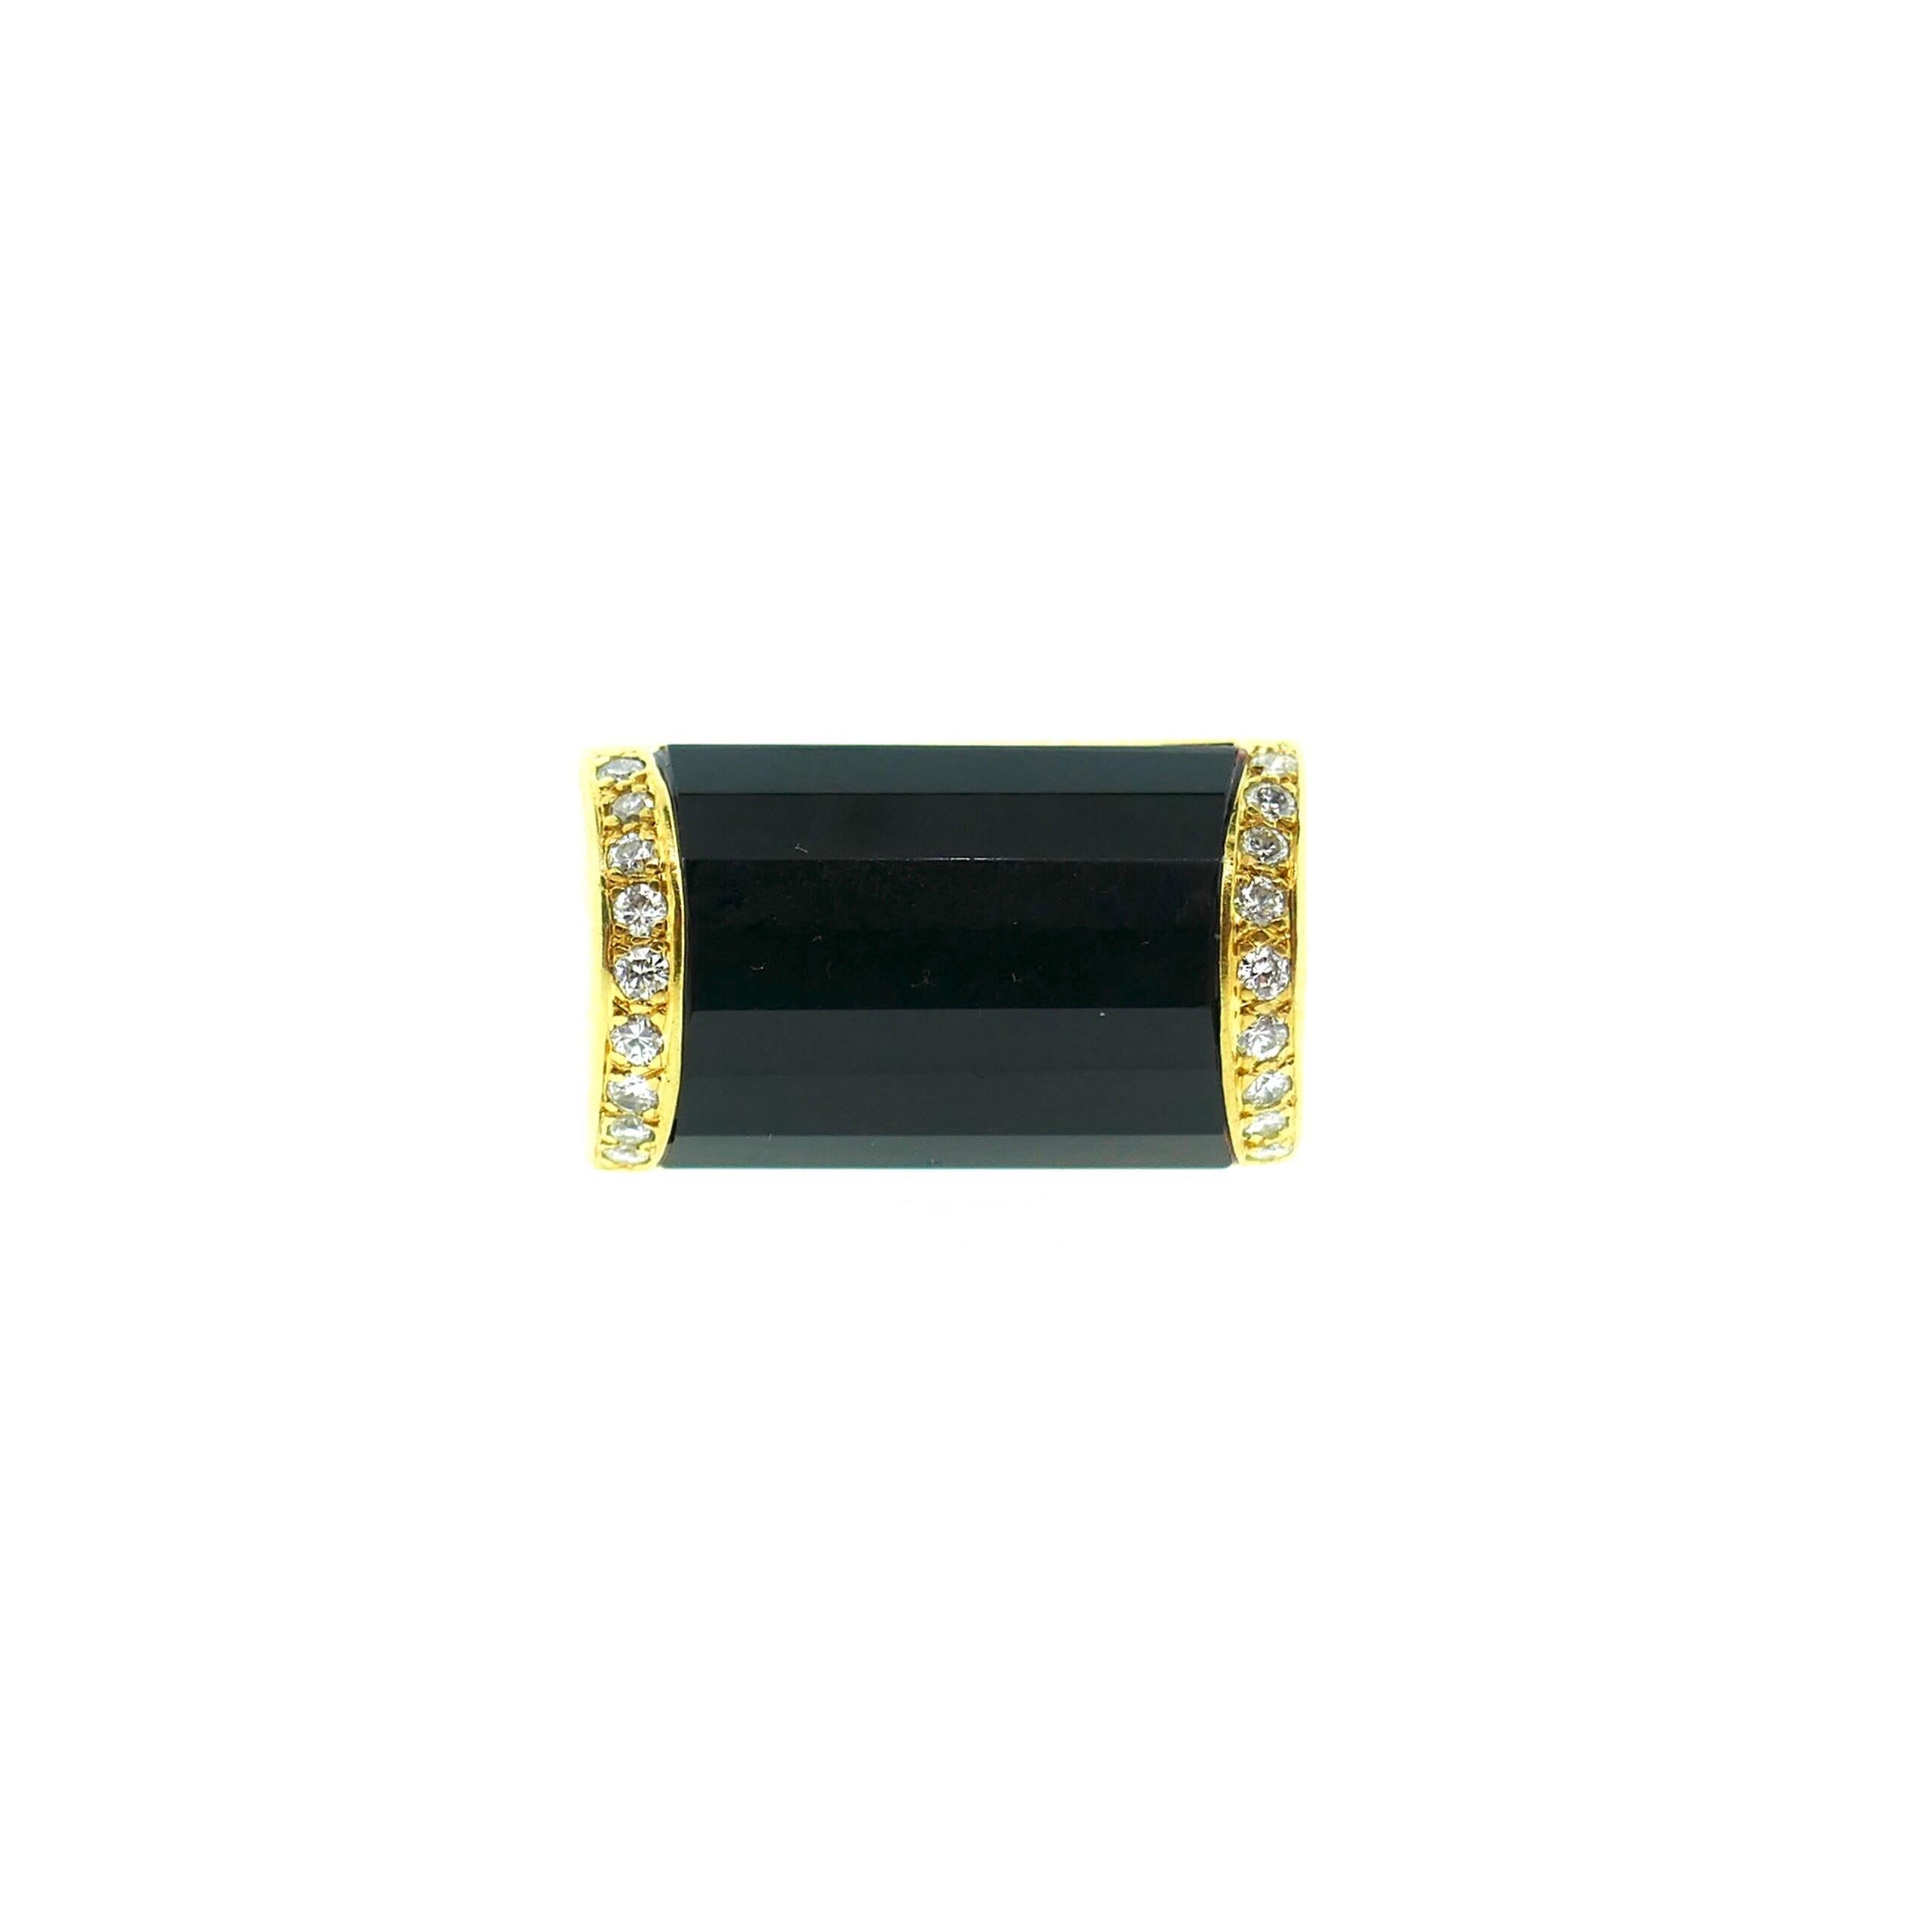 La Triomphe 18 Karat Yellow Gold Diamond Faceted Onyx Ring

This is a beautiful large La Triomphe ring. It features faceted onyx as a center stone surrounded on two sides by excellent quality diamonds. 

Weight: 13.3 Grams

Size: 6 US

Signature /